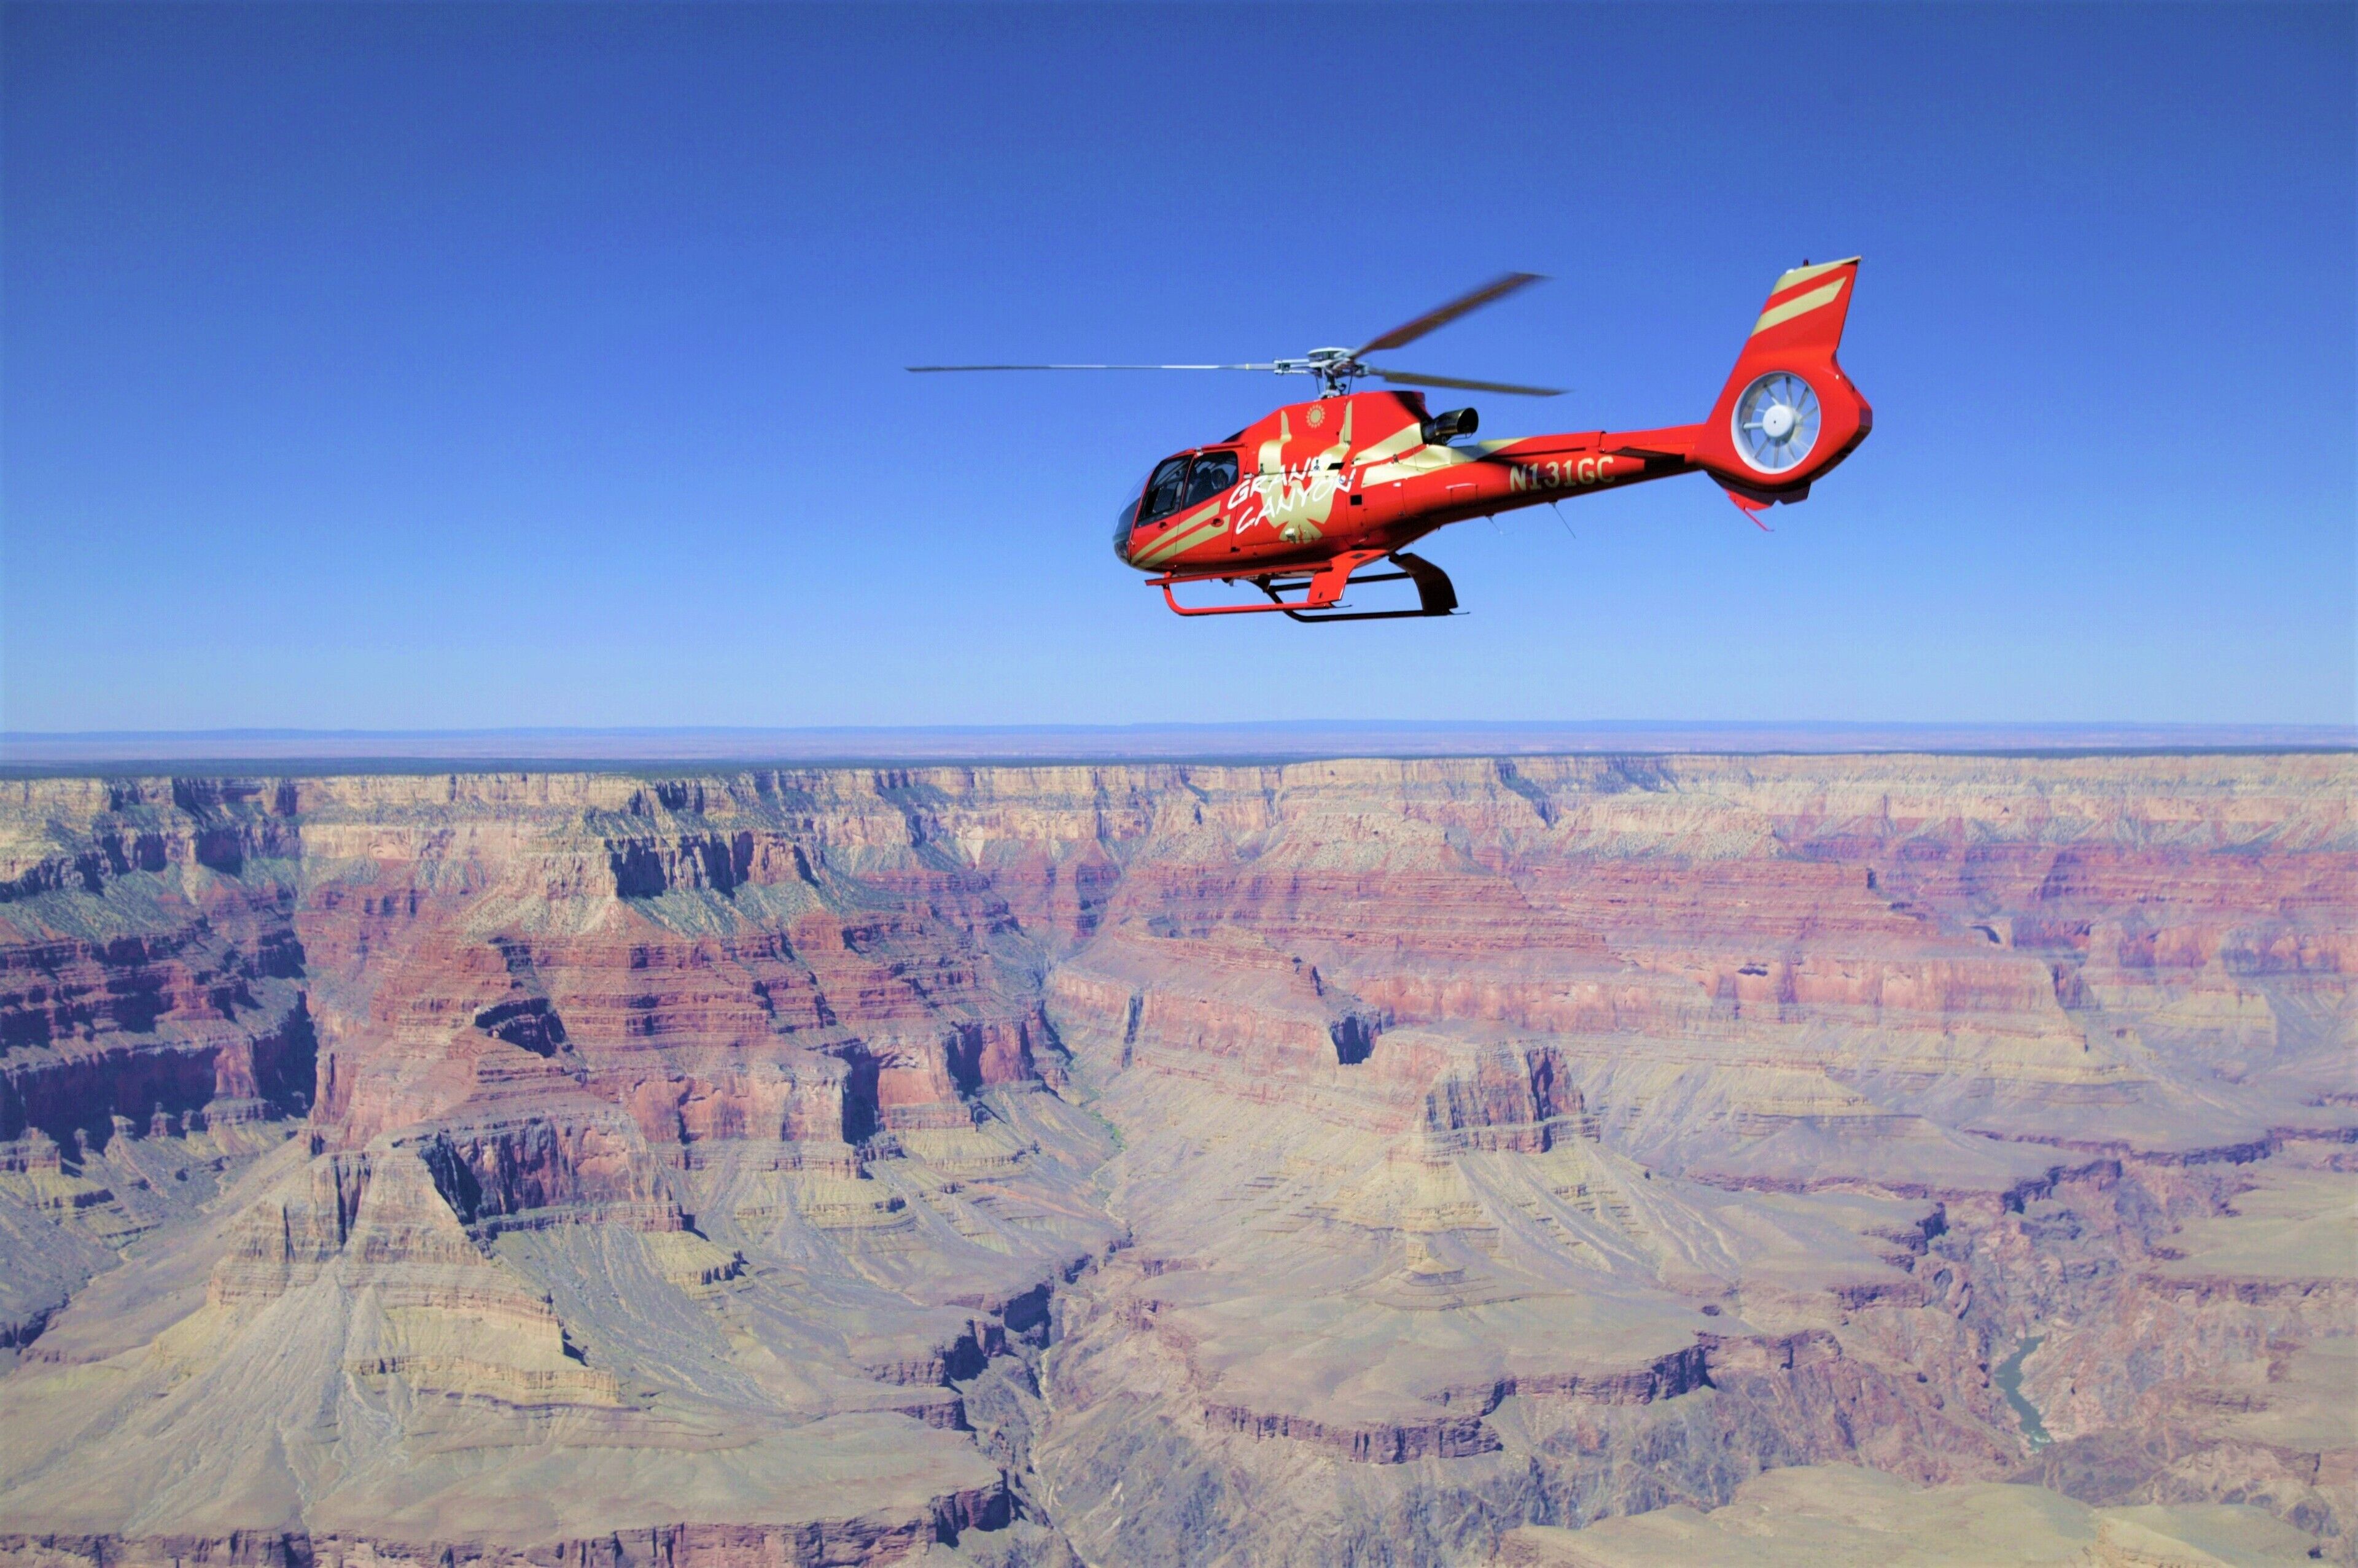 grand canyon tour with helicopter